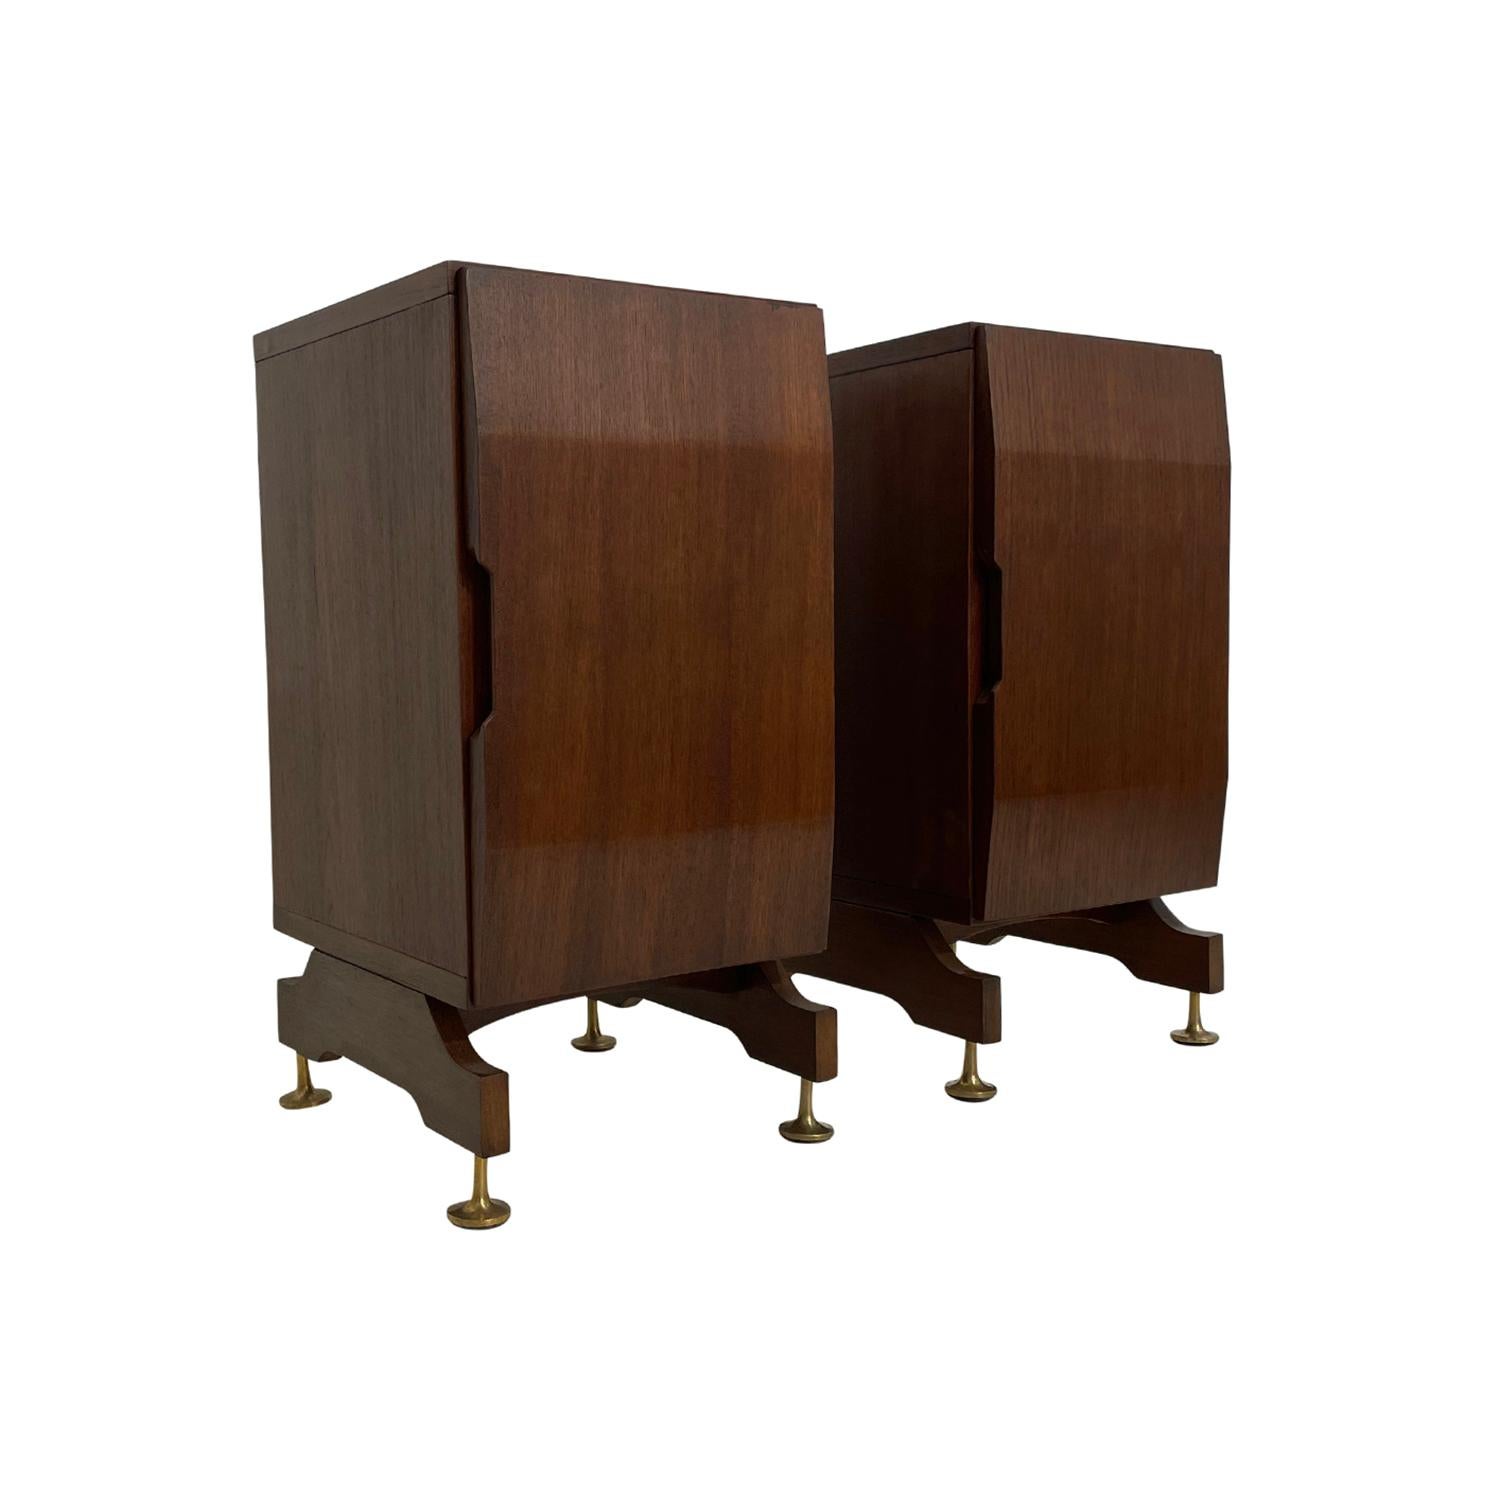 20th Century Italian Mid-Century Pair of Walnut Nightstands, Vintage Side Tables In Good Condition For Sale In West Palm Beach, FL